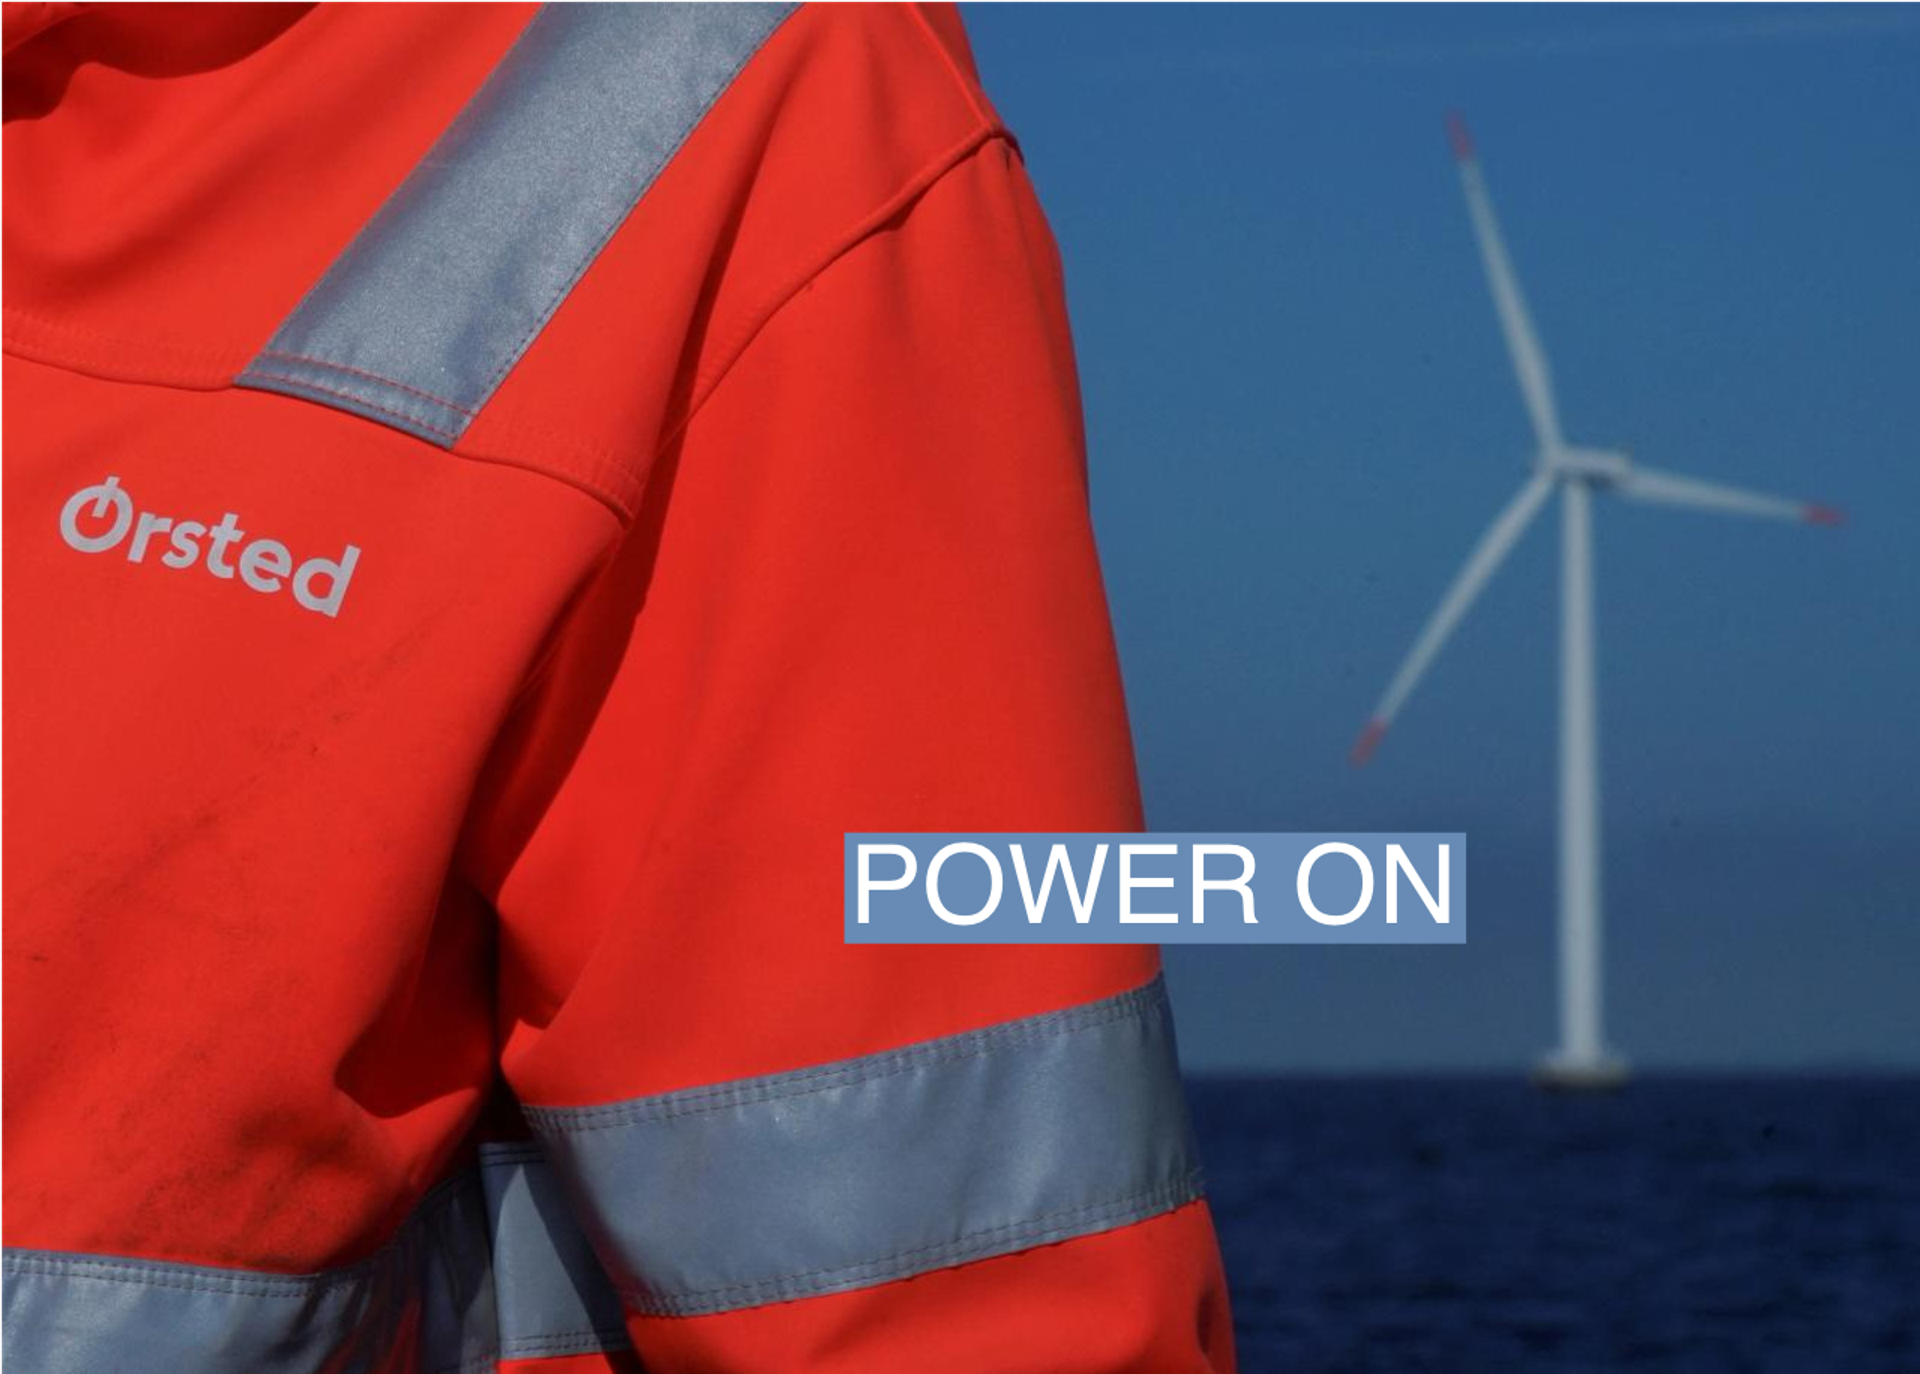 The logo for Orsted can be seen on the jacket worn by an employee as he talks to journalists during a visit to the offshore wind farm near Nysted, Denmark, September 4, 2023. REUTERS/Tom Little/File Photo